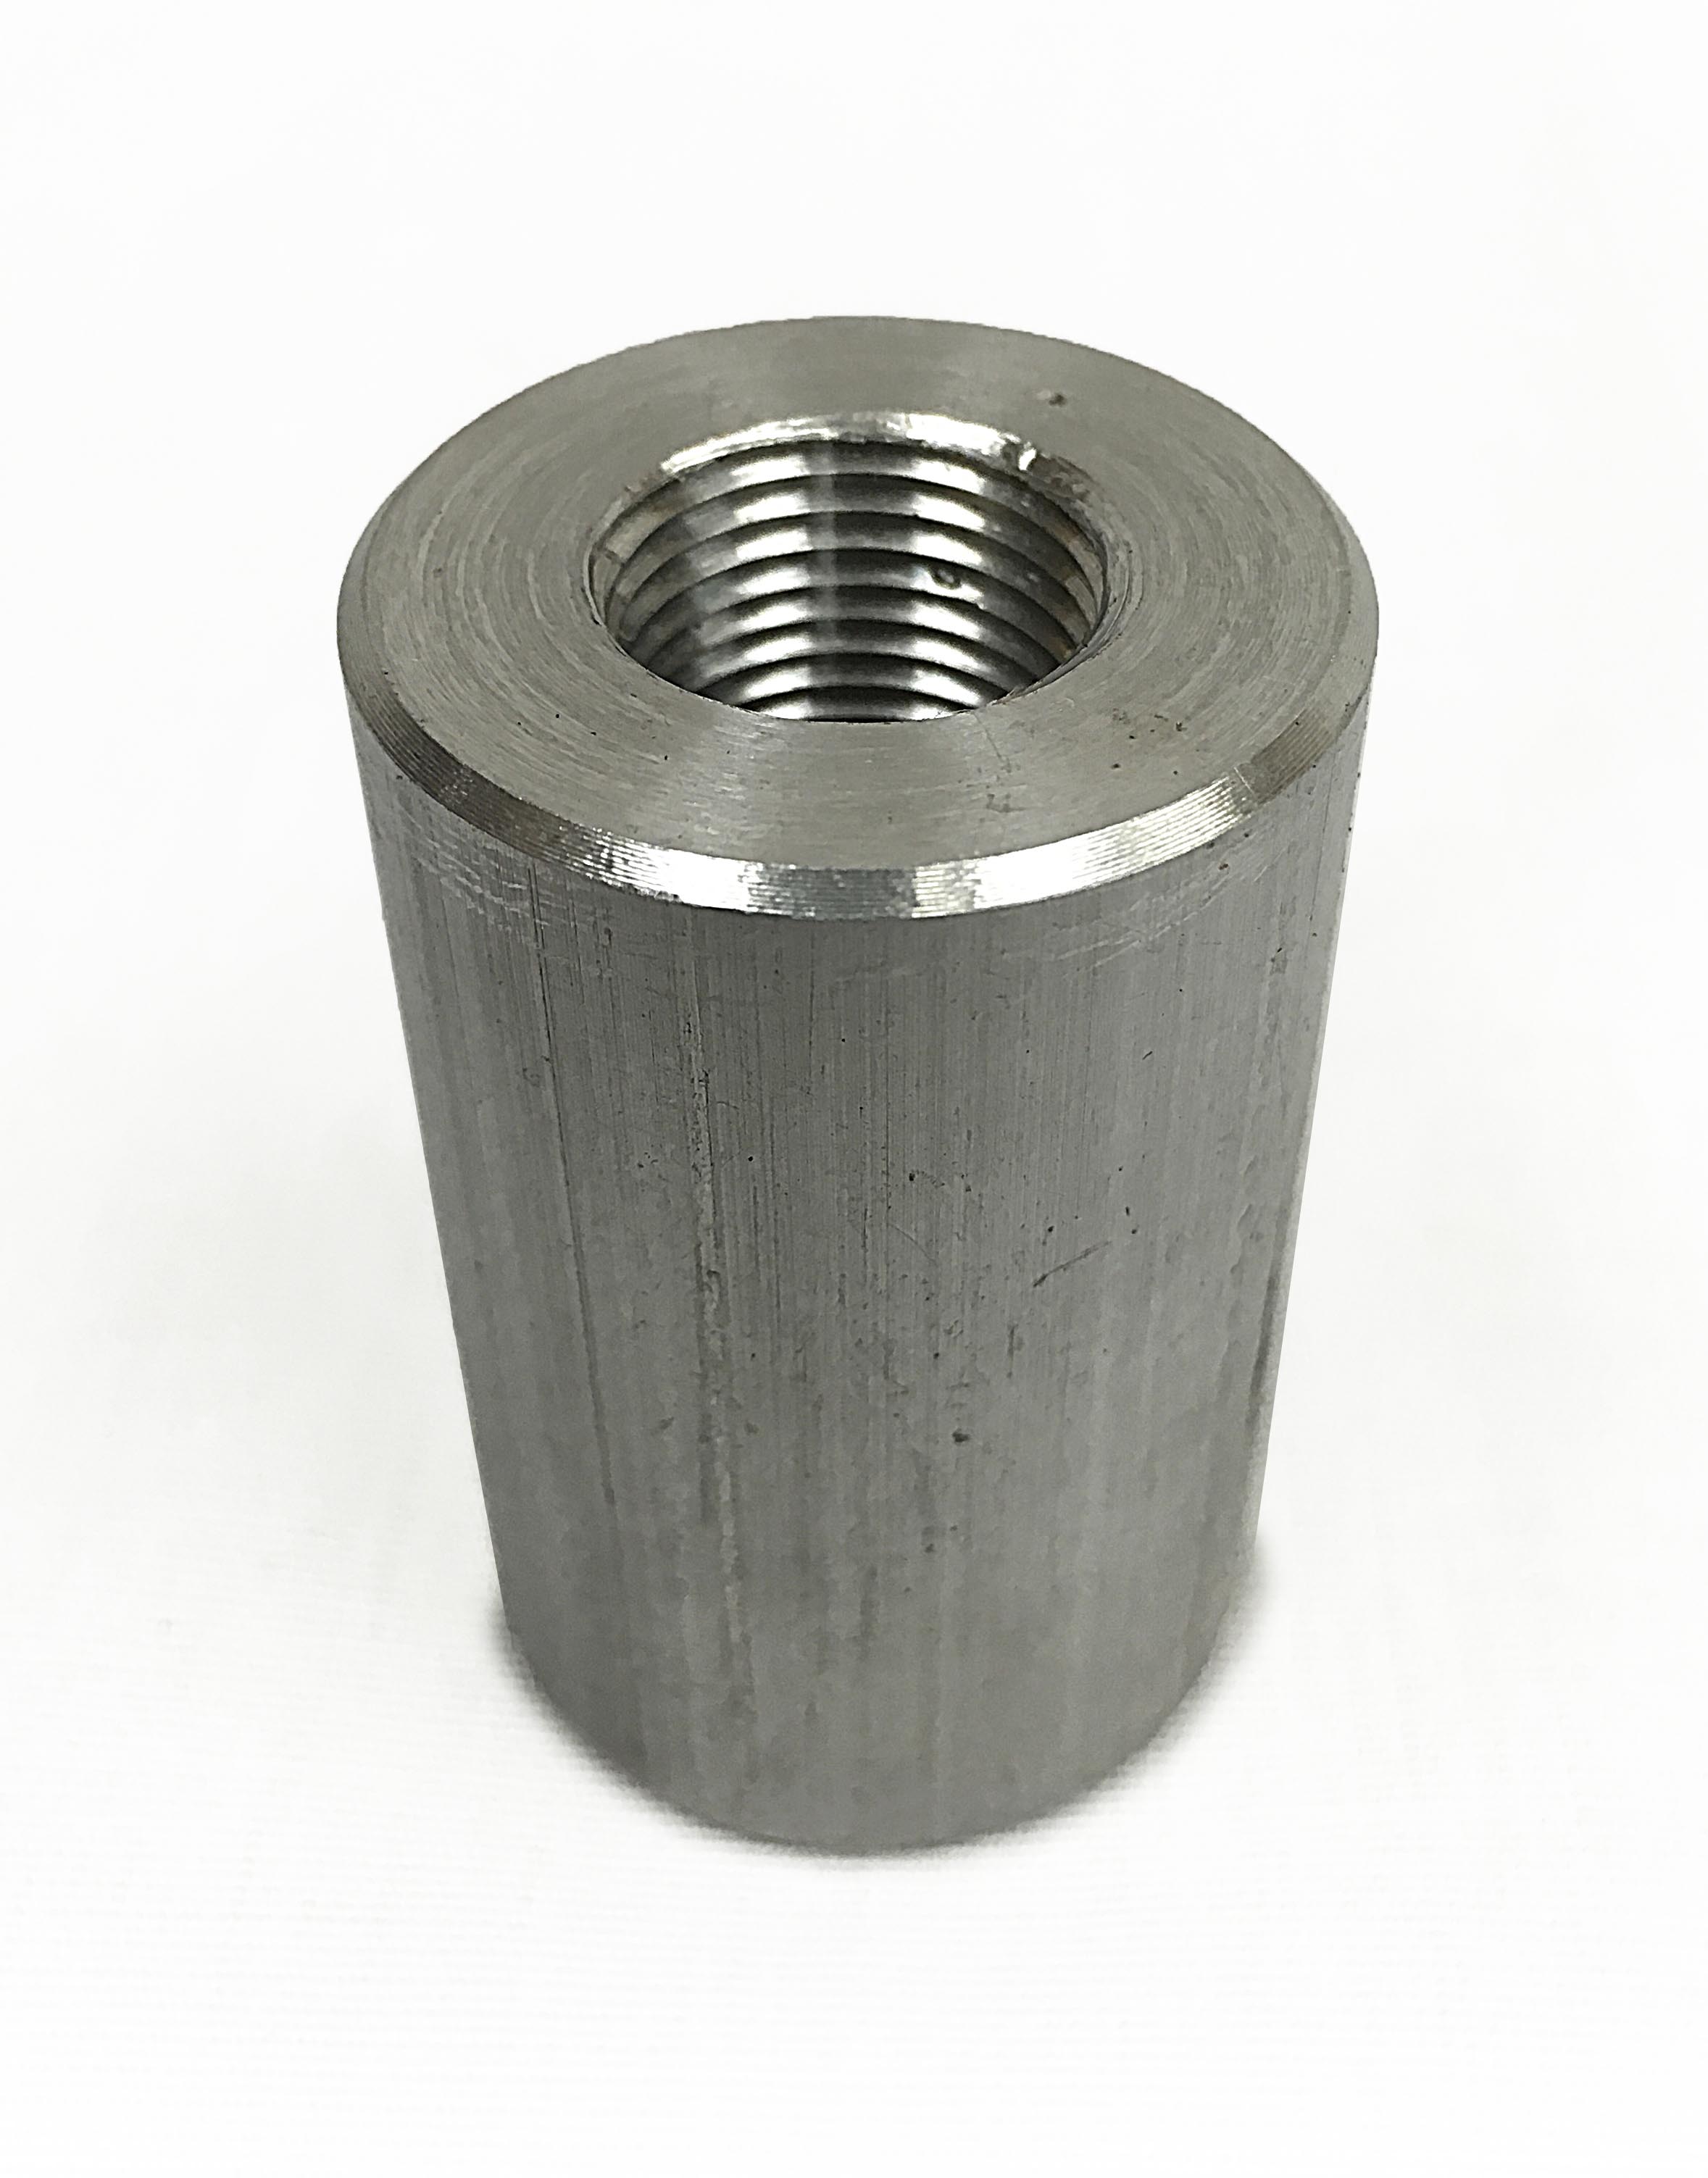 Machined Part - Round bar, , 1 1/4” O.D. WITH 3/8” NPT thread and chamfered edge